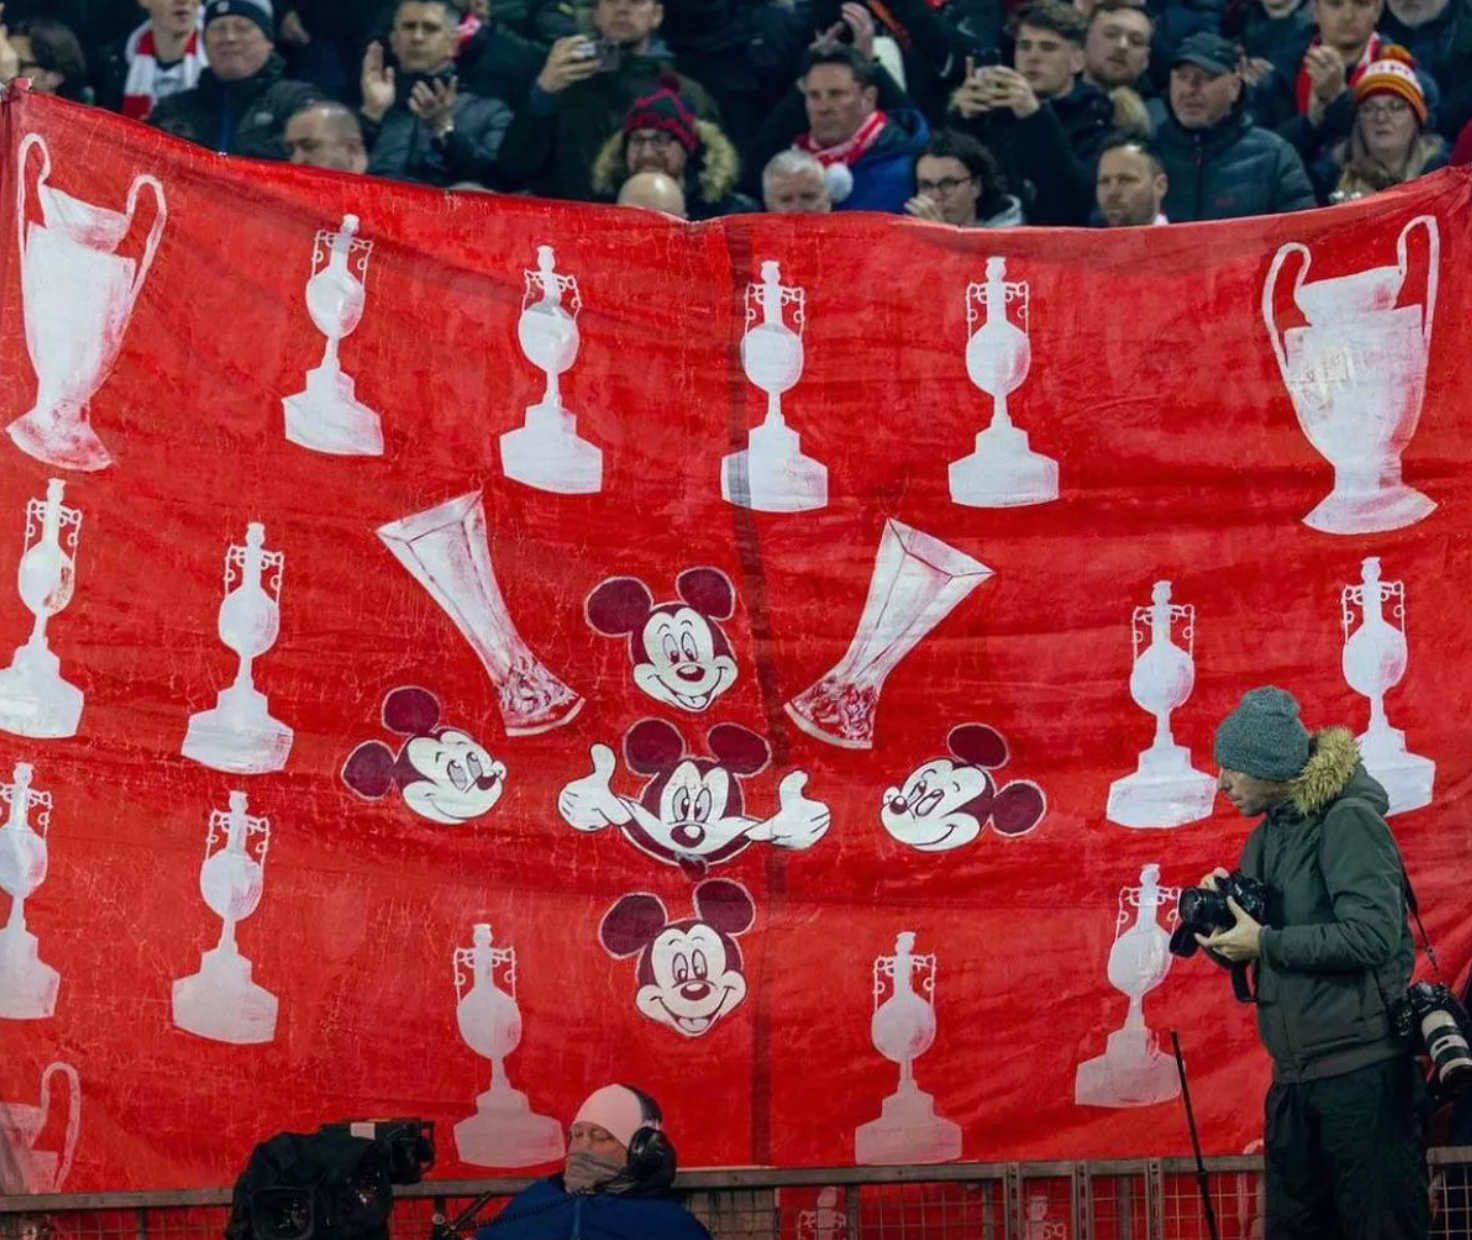 Shankly, Paisley, Dortmund And Divvies: Why Thursday Nights Are Alright